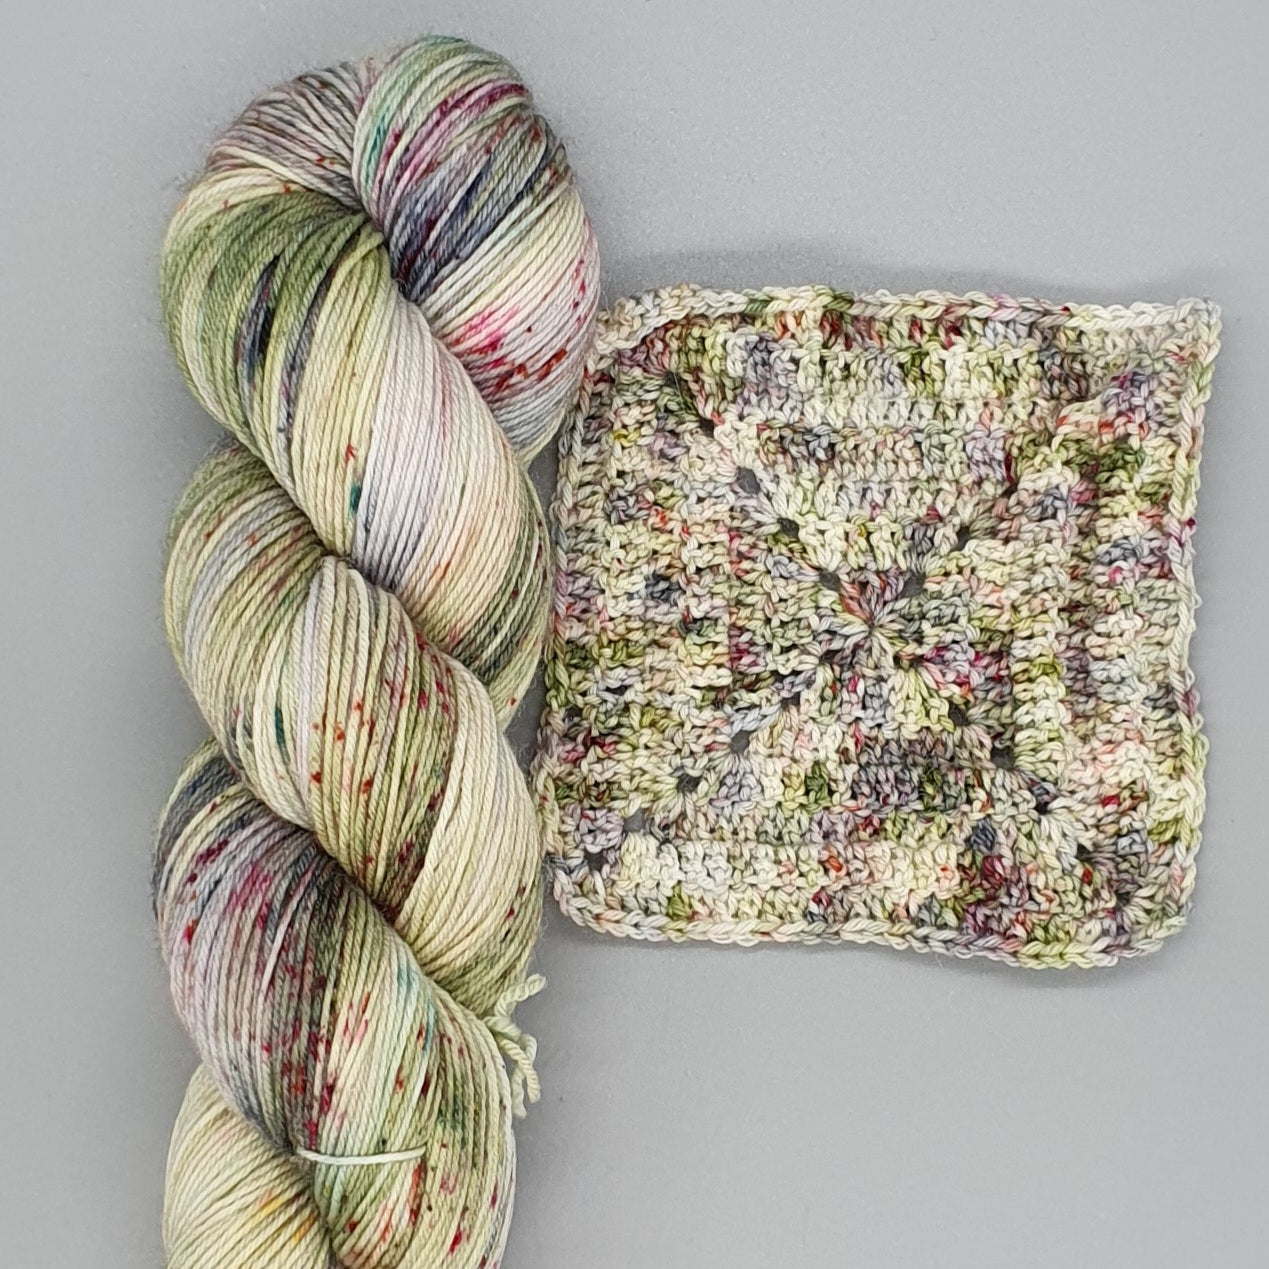 The Tale Of The Pie And The Patty-Pan - Merino DK